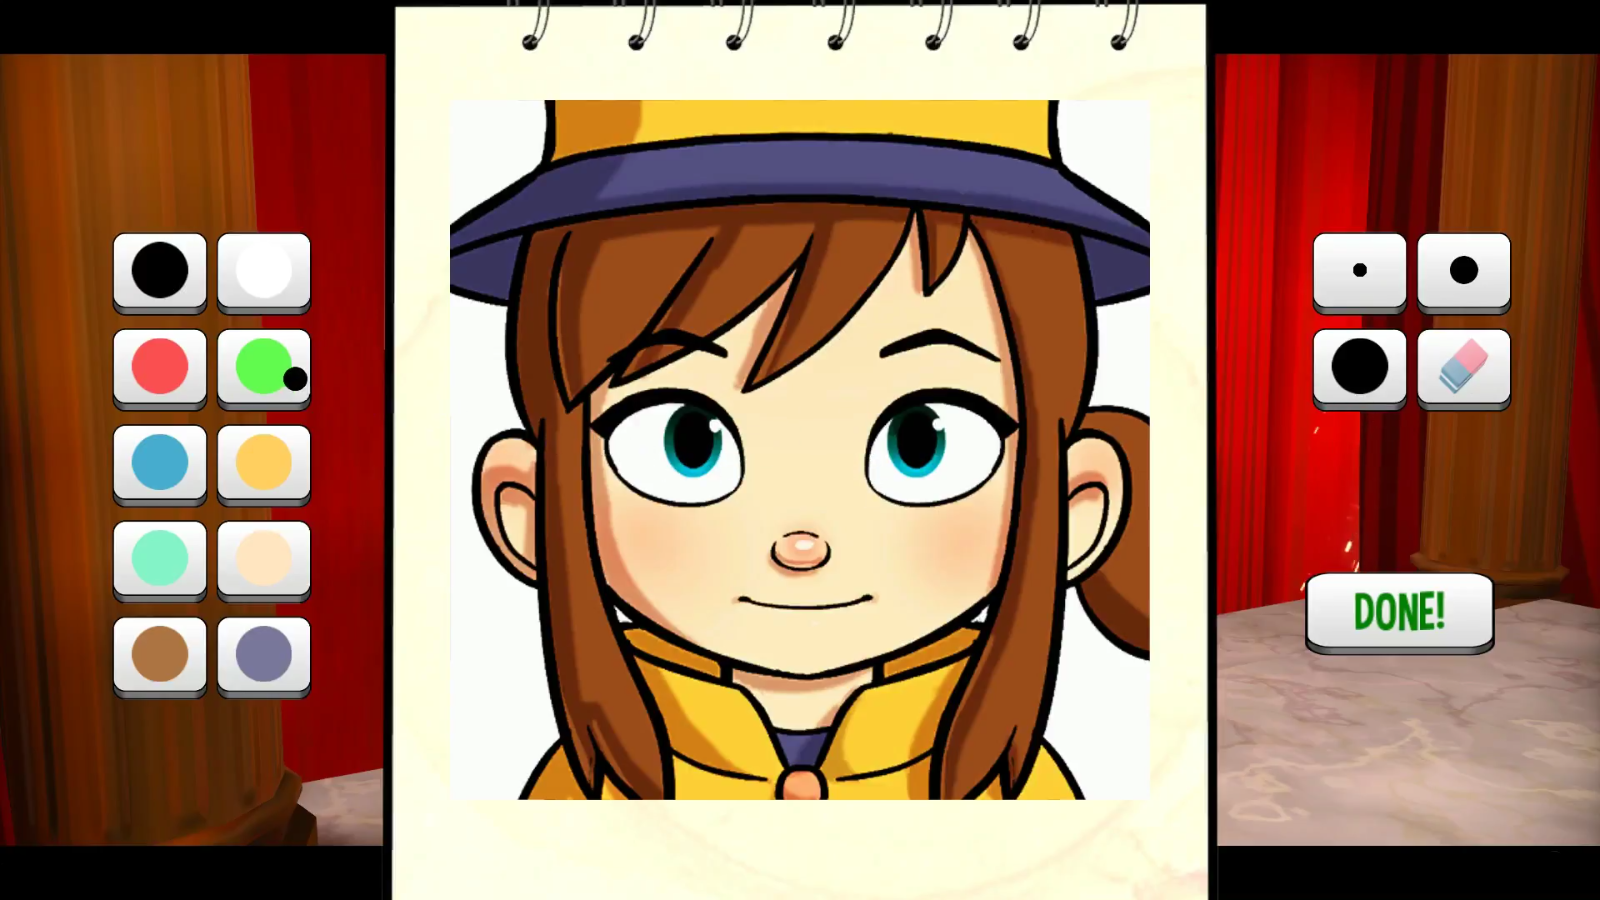 hat in time snatcher coins battle of the birds